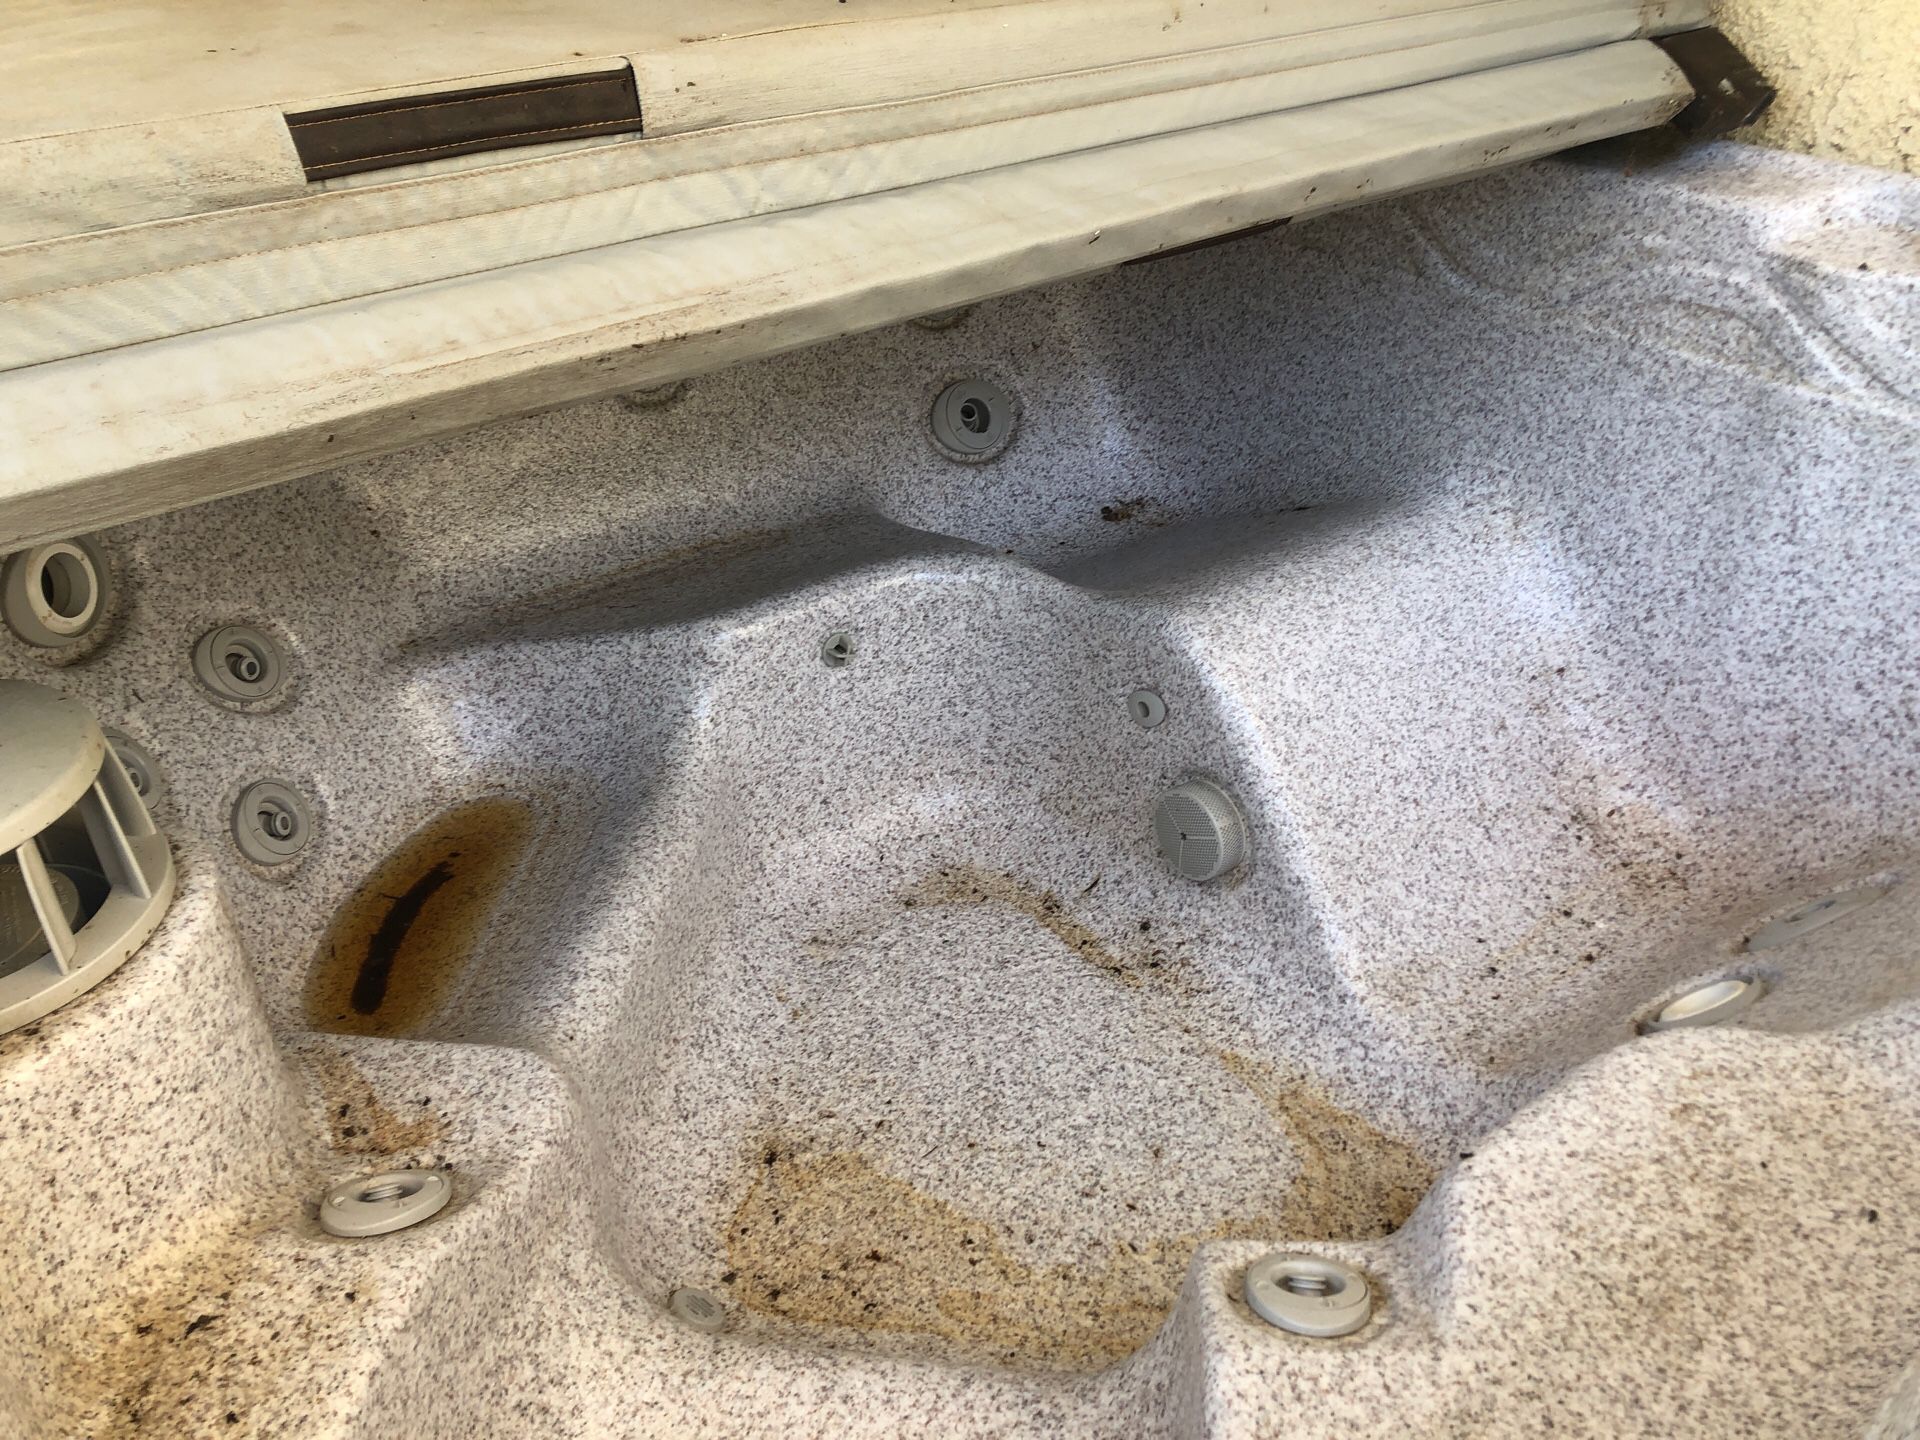 Hot tub ( you pick up)